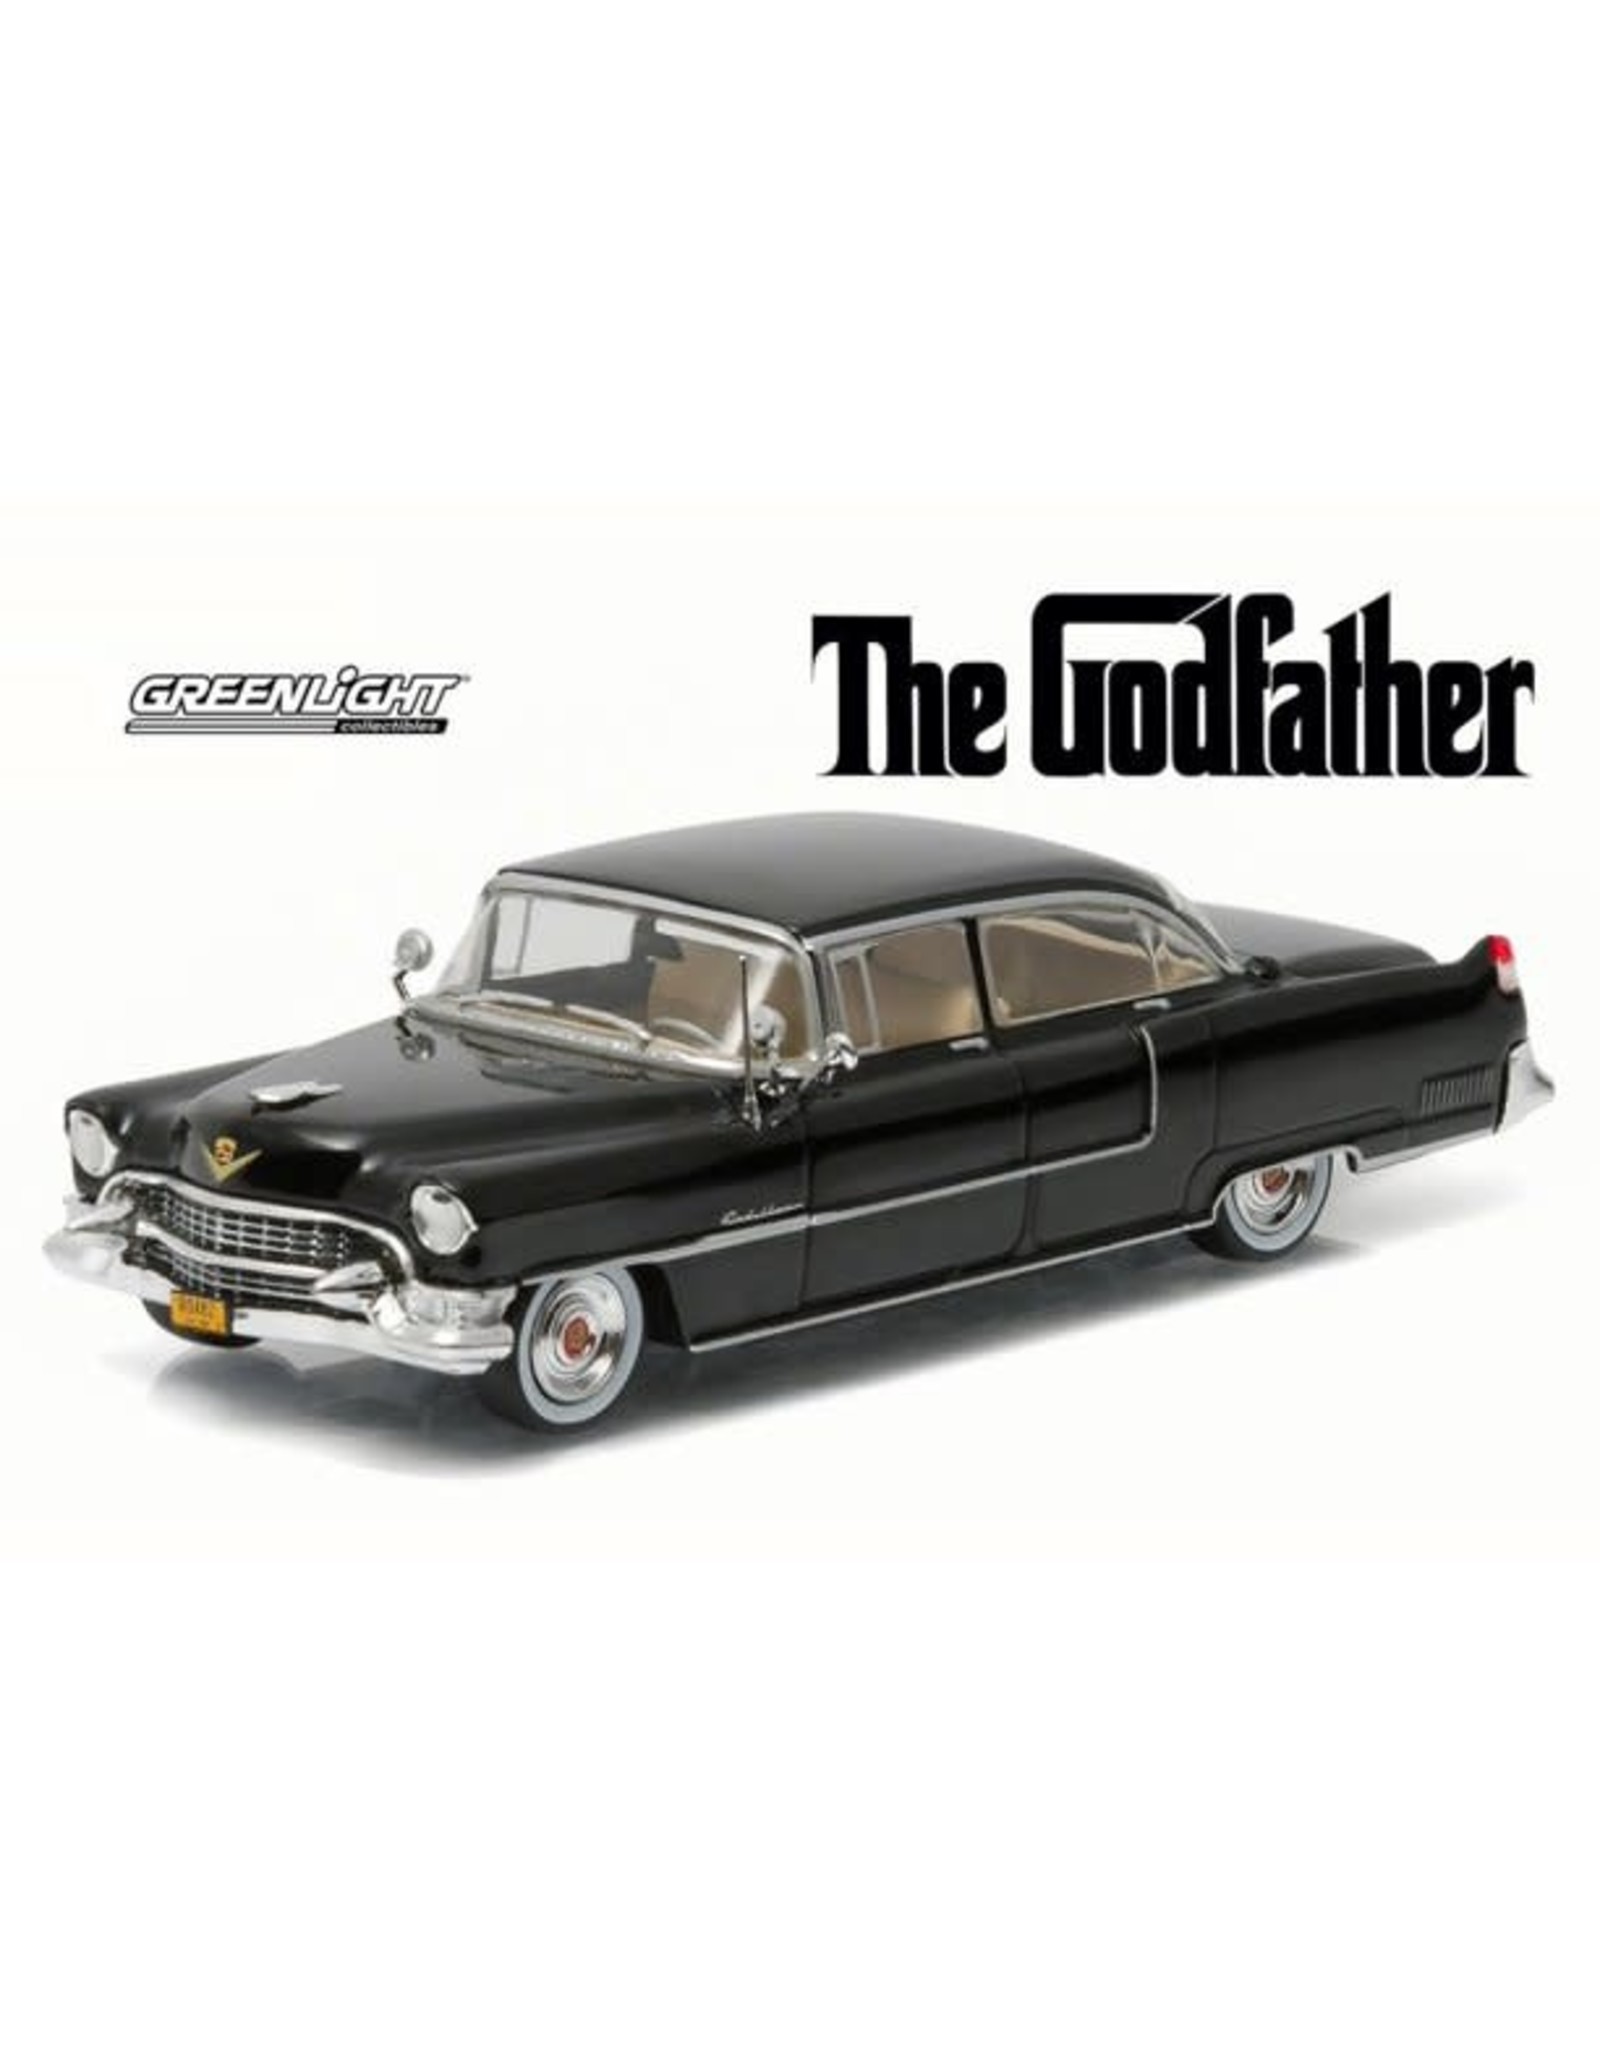 1:18 The Godfather 1955 Cadillac Fleetwood Series 60